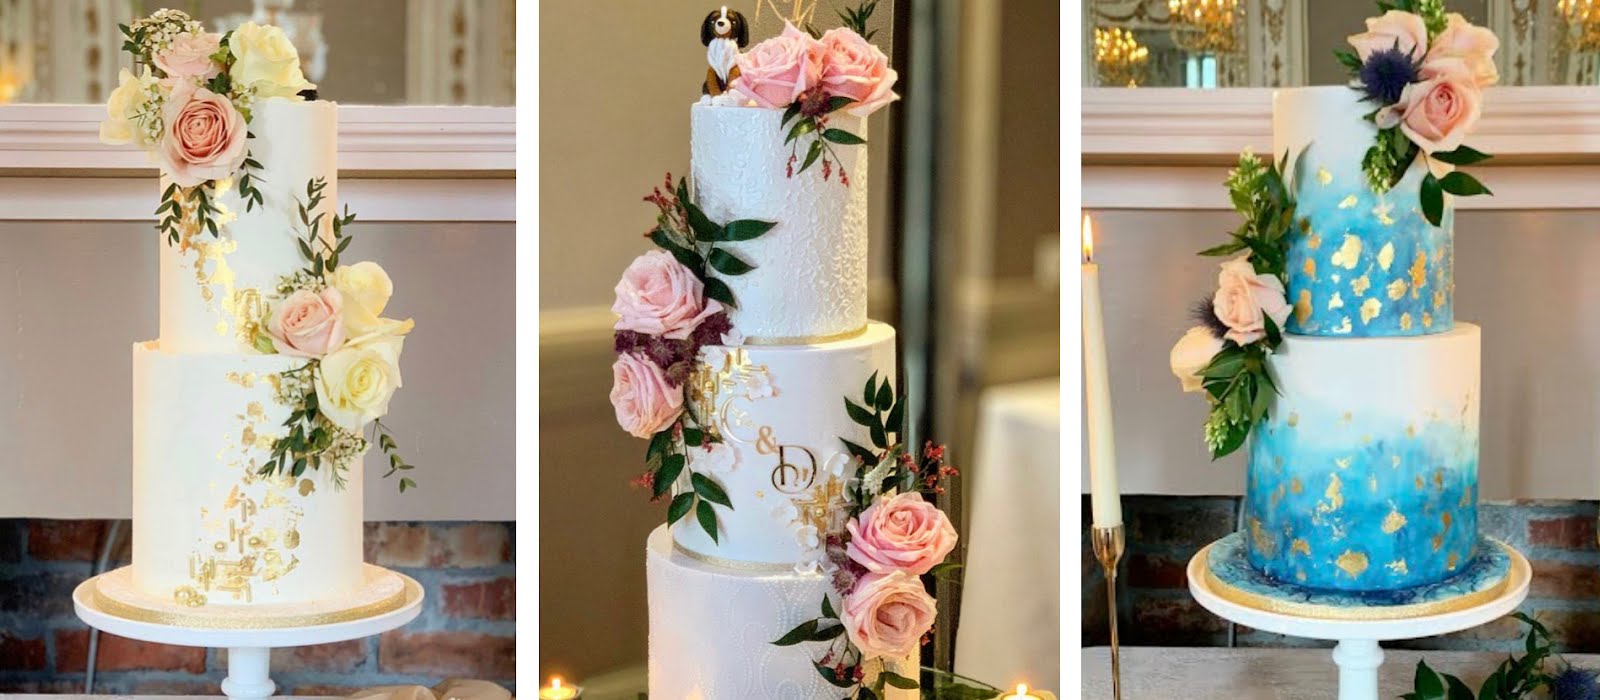 34 Simple Wedding Cakes That Prove Less Is More